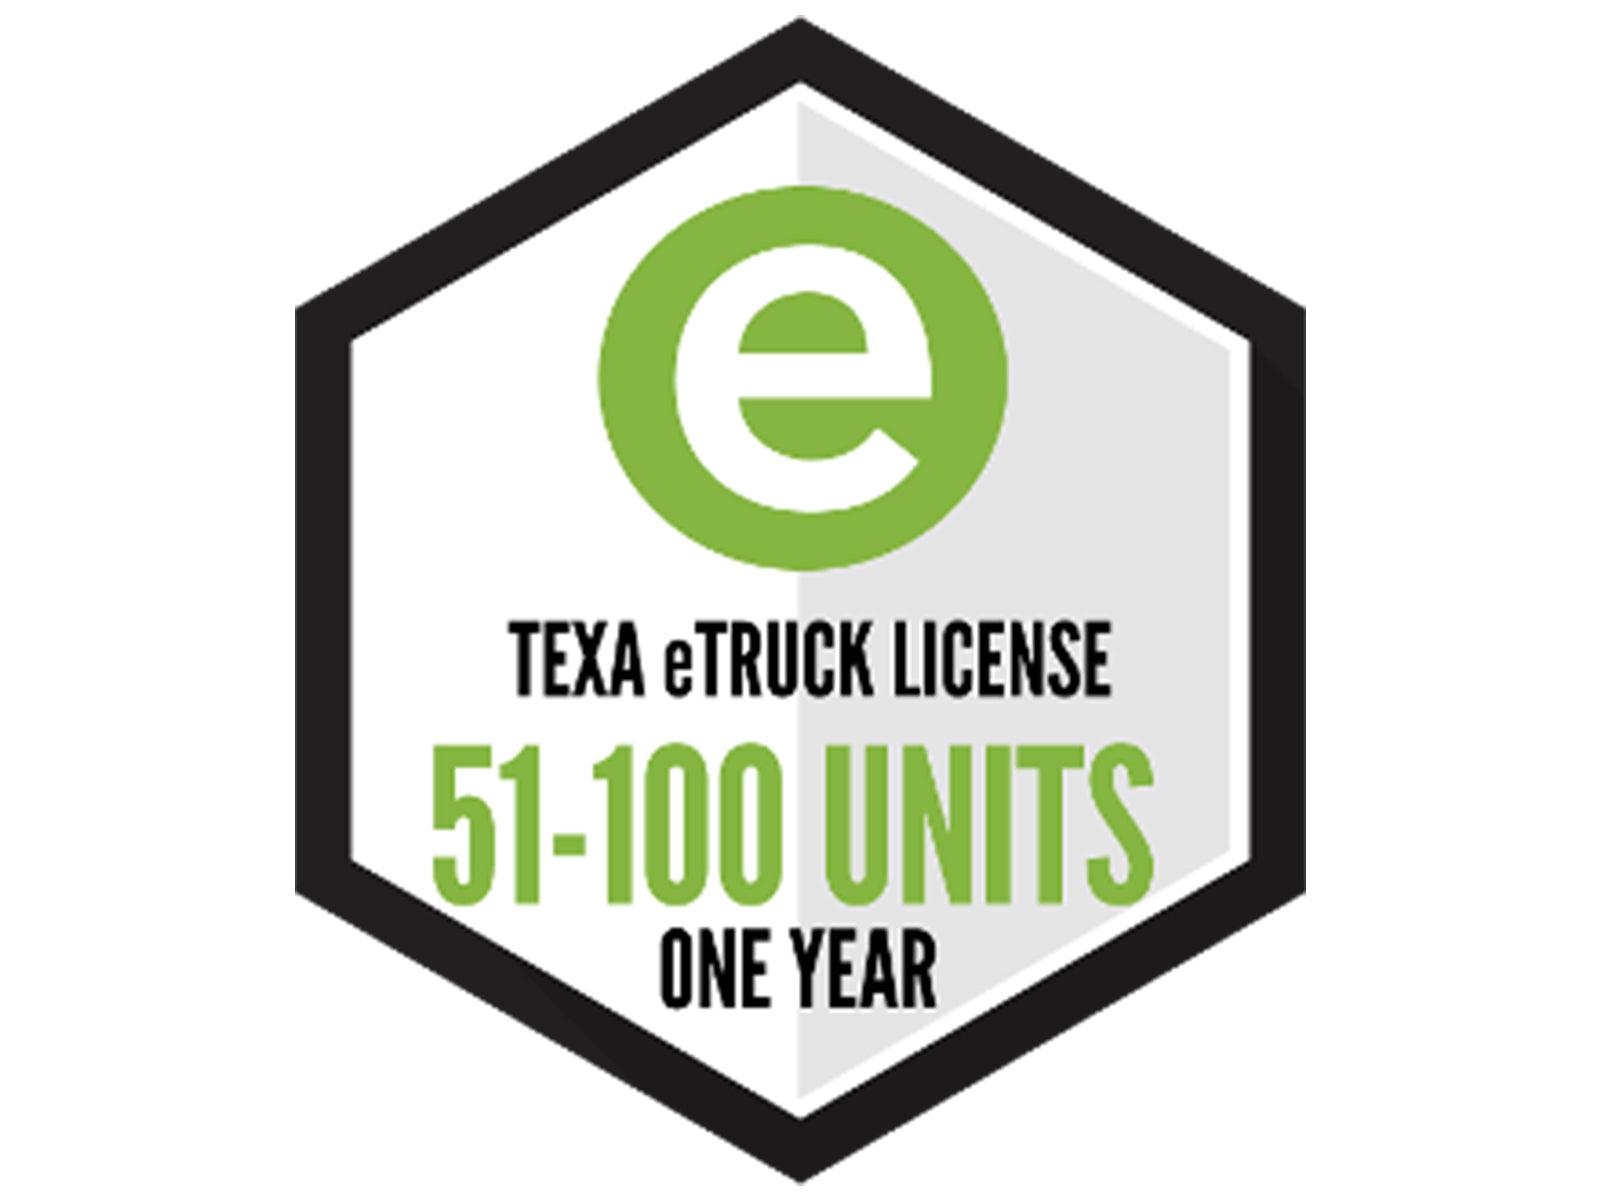 TEXA eTruck Software License for 51-100 Units